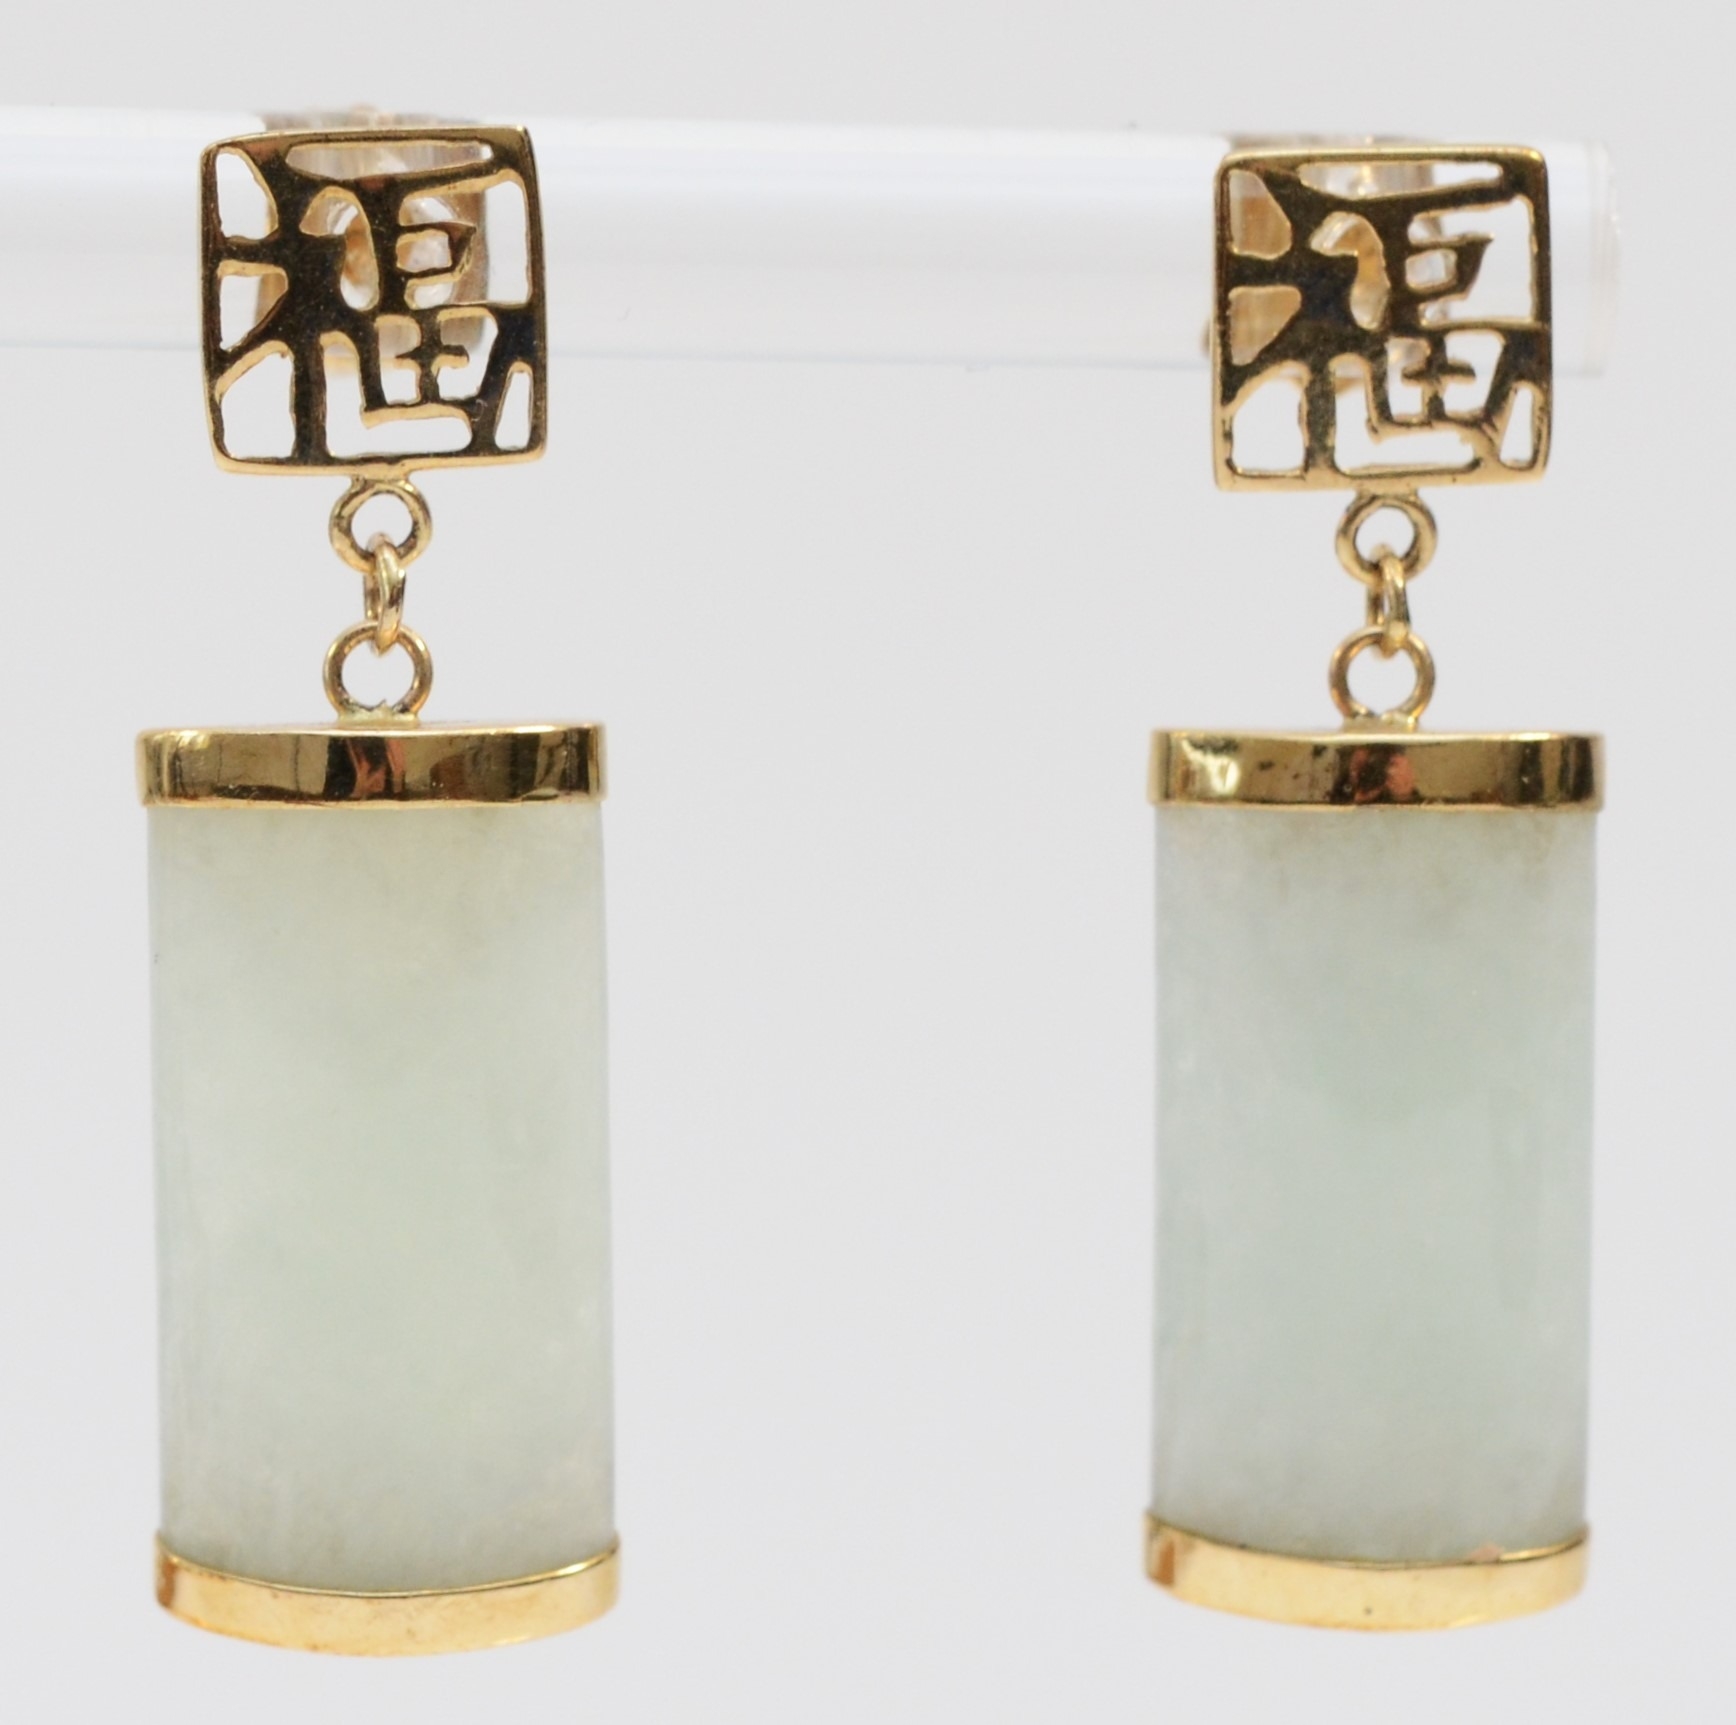 A Chines pair of 9k gold and Jadeite ear pendants, 29mm